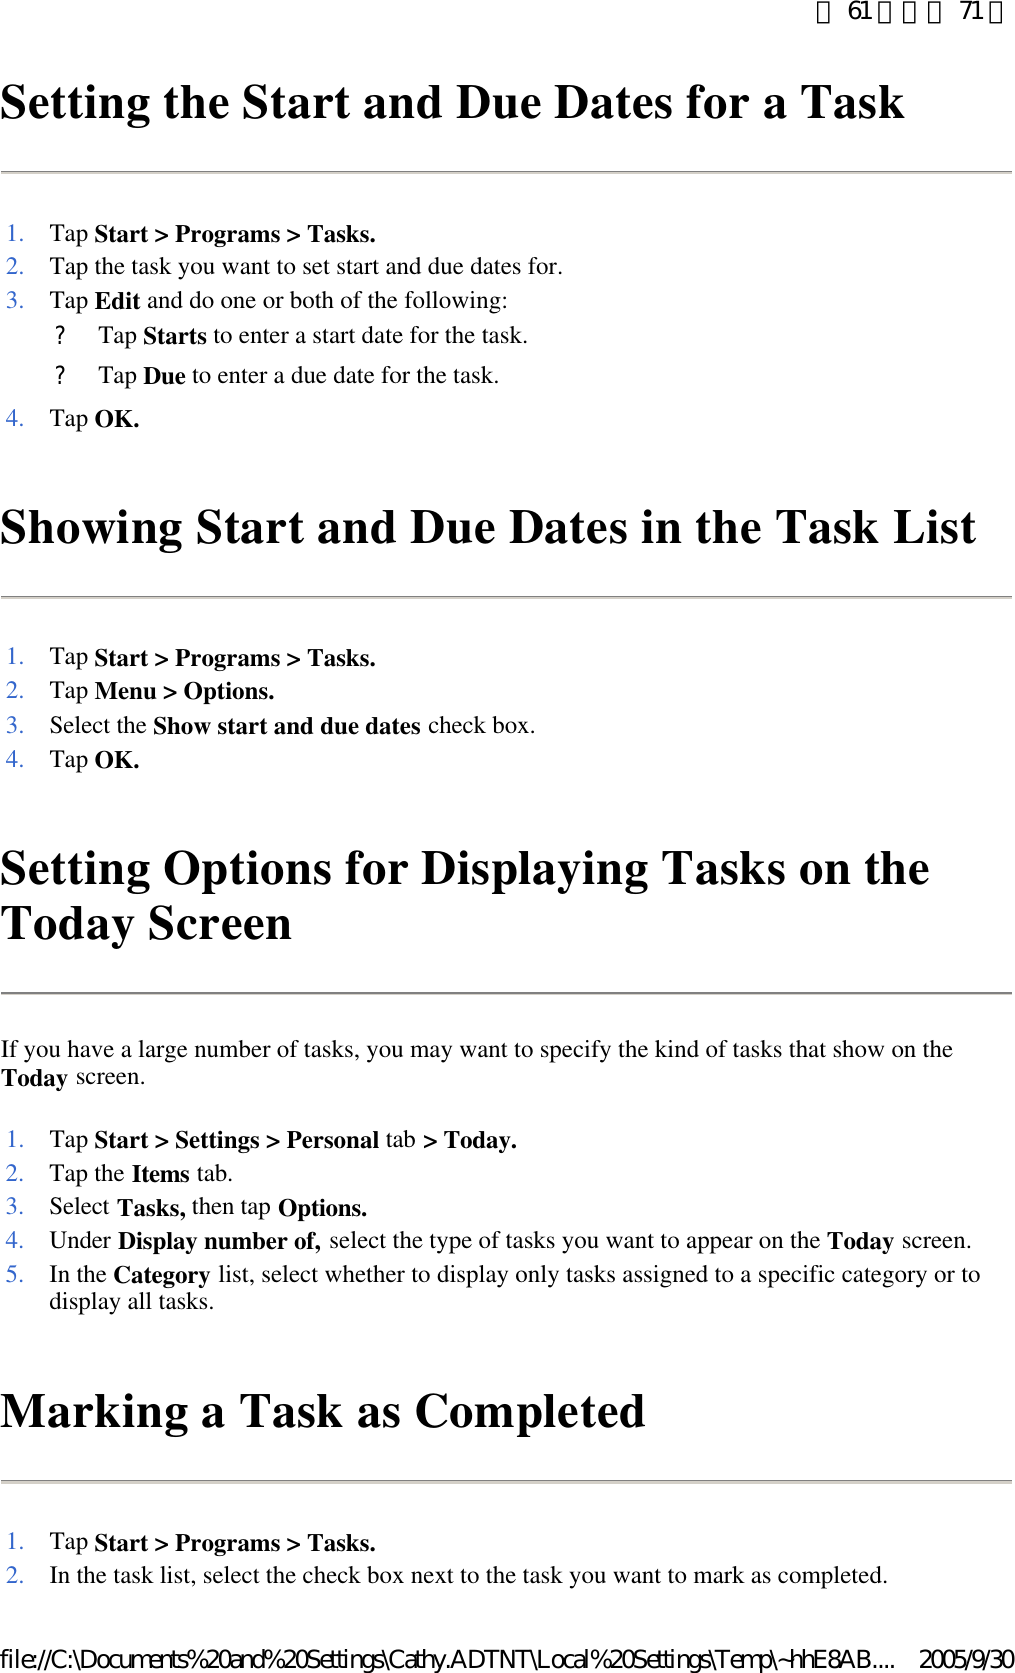 Setting the Start and Due Dates for a Task  Showing Start and Due Dates in the Task List  Setting Options for Displaying Tasks on the Today Screen If you have a large number of tasks, you may want to specify the kind of tasks that show on the Today screen.  Marking a Task as Completed  1. Tap Start &gt; Programs &gt; Tasks.2.Tap the task you want to set start and due dates for. 3. Tap Edit and do one or both of the following: ?Tap Starts to enter a start date for the task. ?Tap Due to enter a due date for the task. 4. Tap OK.1. Tap Start &gt; Programs &gt; Tasks.2. Tap Menu &gt; Options.3. Select the Show start and due dates check box. 4. Tap OK.1. Tap Start &gt; Settings &gt; Personal tab &gt; Today.2. Tap the Items tab. 3. Select Tasks, then tap Options.4. Under Display number of, select the type of tasks you want to appear on the Today screen. 5. In the Category list, select whether to display only tasks assigned to a specific category or to display all tasks. 1. Tap Start &gt; Programs &gt; Tasks.2.In the task list, select the check box next to the task you want to mark as completed. 第 61 頁，共 71 頁2005/9/30file://C:\Documents%20and%20Settings\Cathy.ADTNT\Local%20Settings\Temp\~hhE8AB....